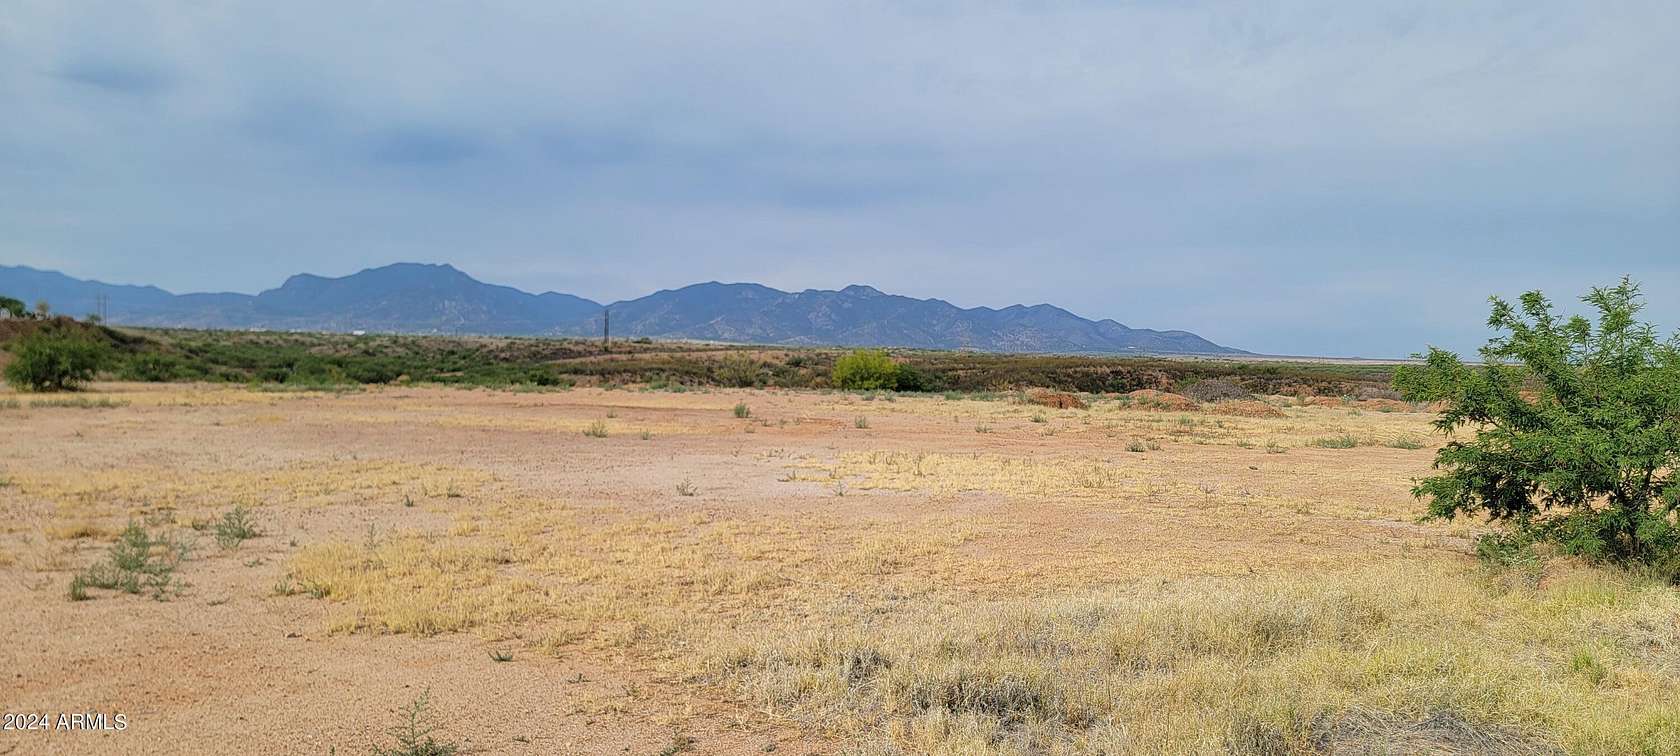 1.73 Acres of Mixed-Use Land for Sale in Huachuca City, Arizona